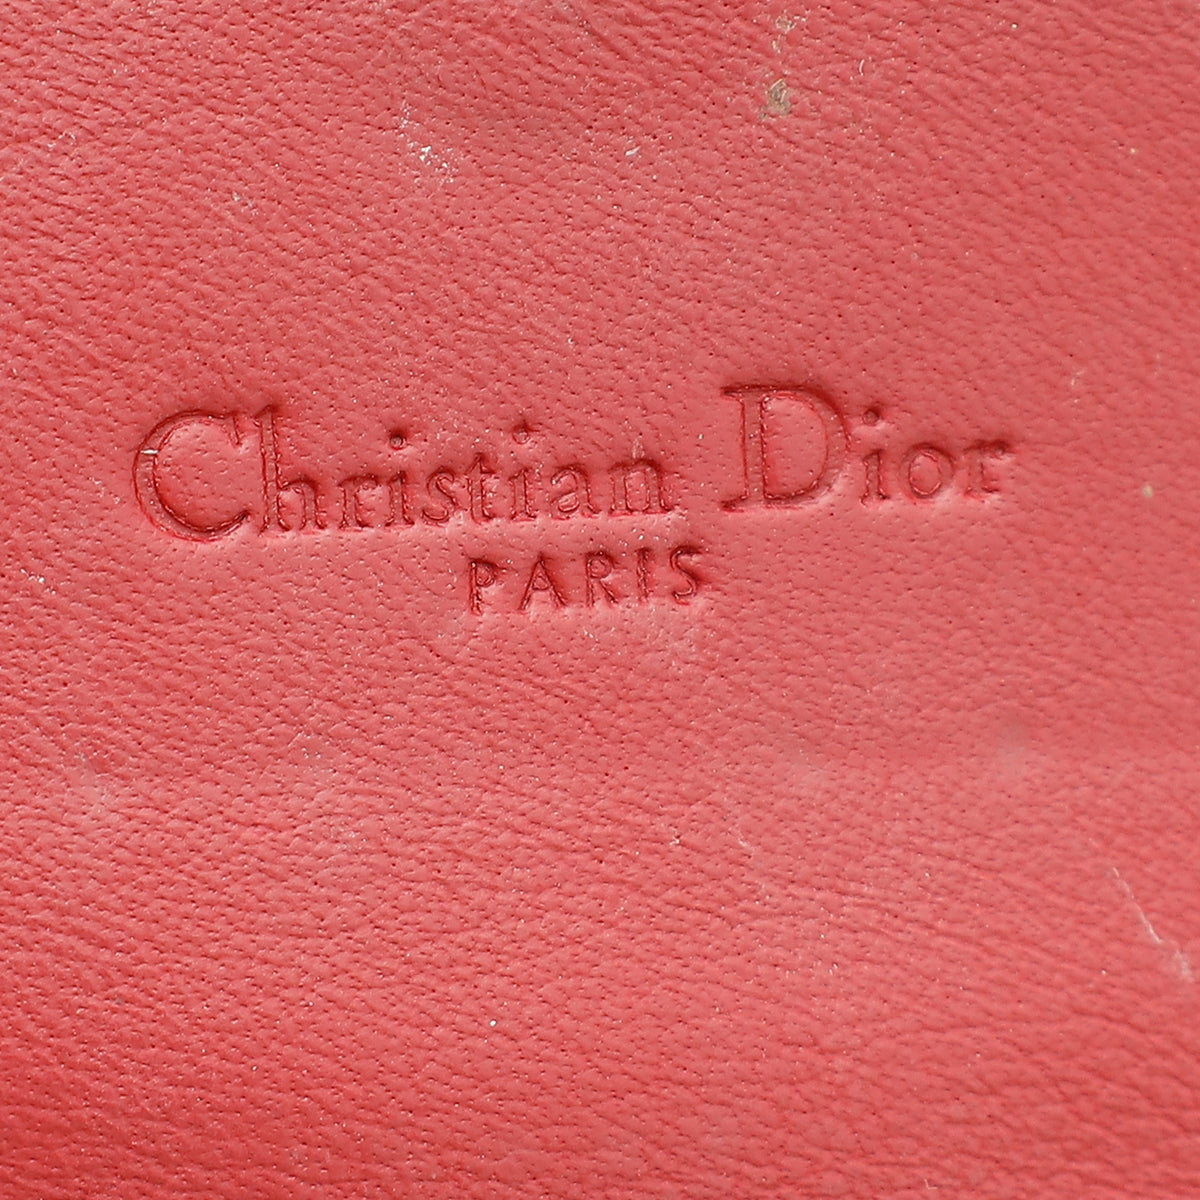 Christian Dior Red Cherry Lady Dior Rendezvous Wallet On Chain